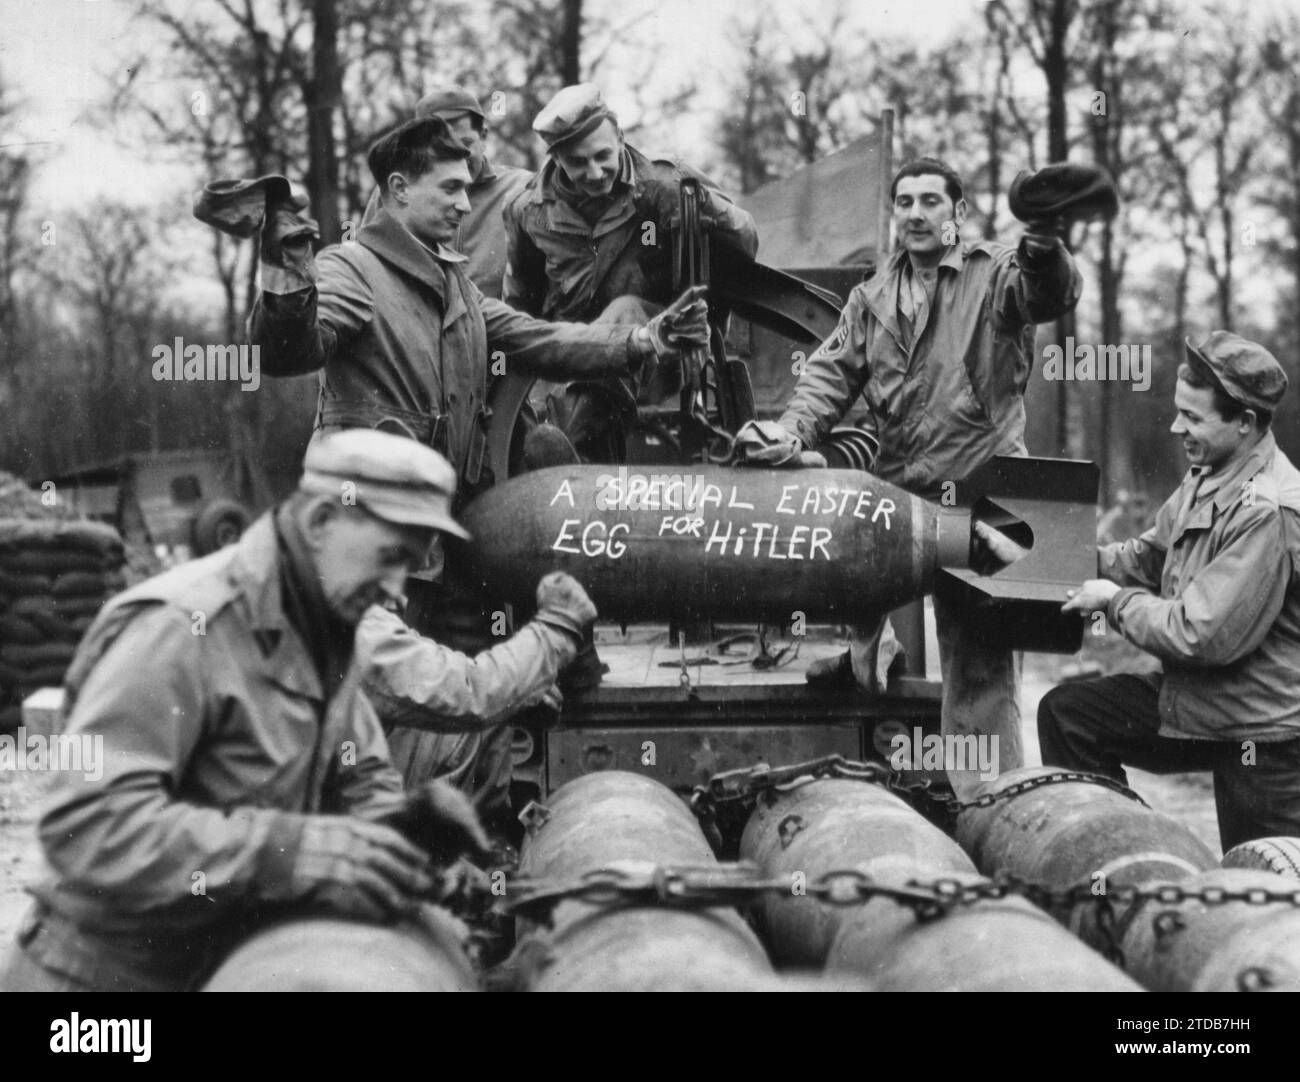 Easter Greeting For Hitler...In Keeping With Holiday Spirit, A special Easter egg for Hitler - These Armament Crewmen Of An 8Th Aaf Fighter Station Want Old Shickelgruber To Know That They Always Think Of Him...But Explosively, circa 1943 Stock Photo